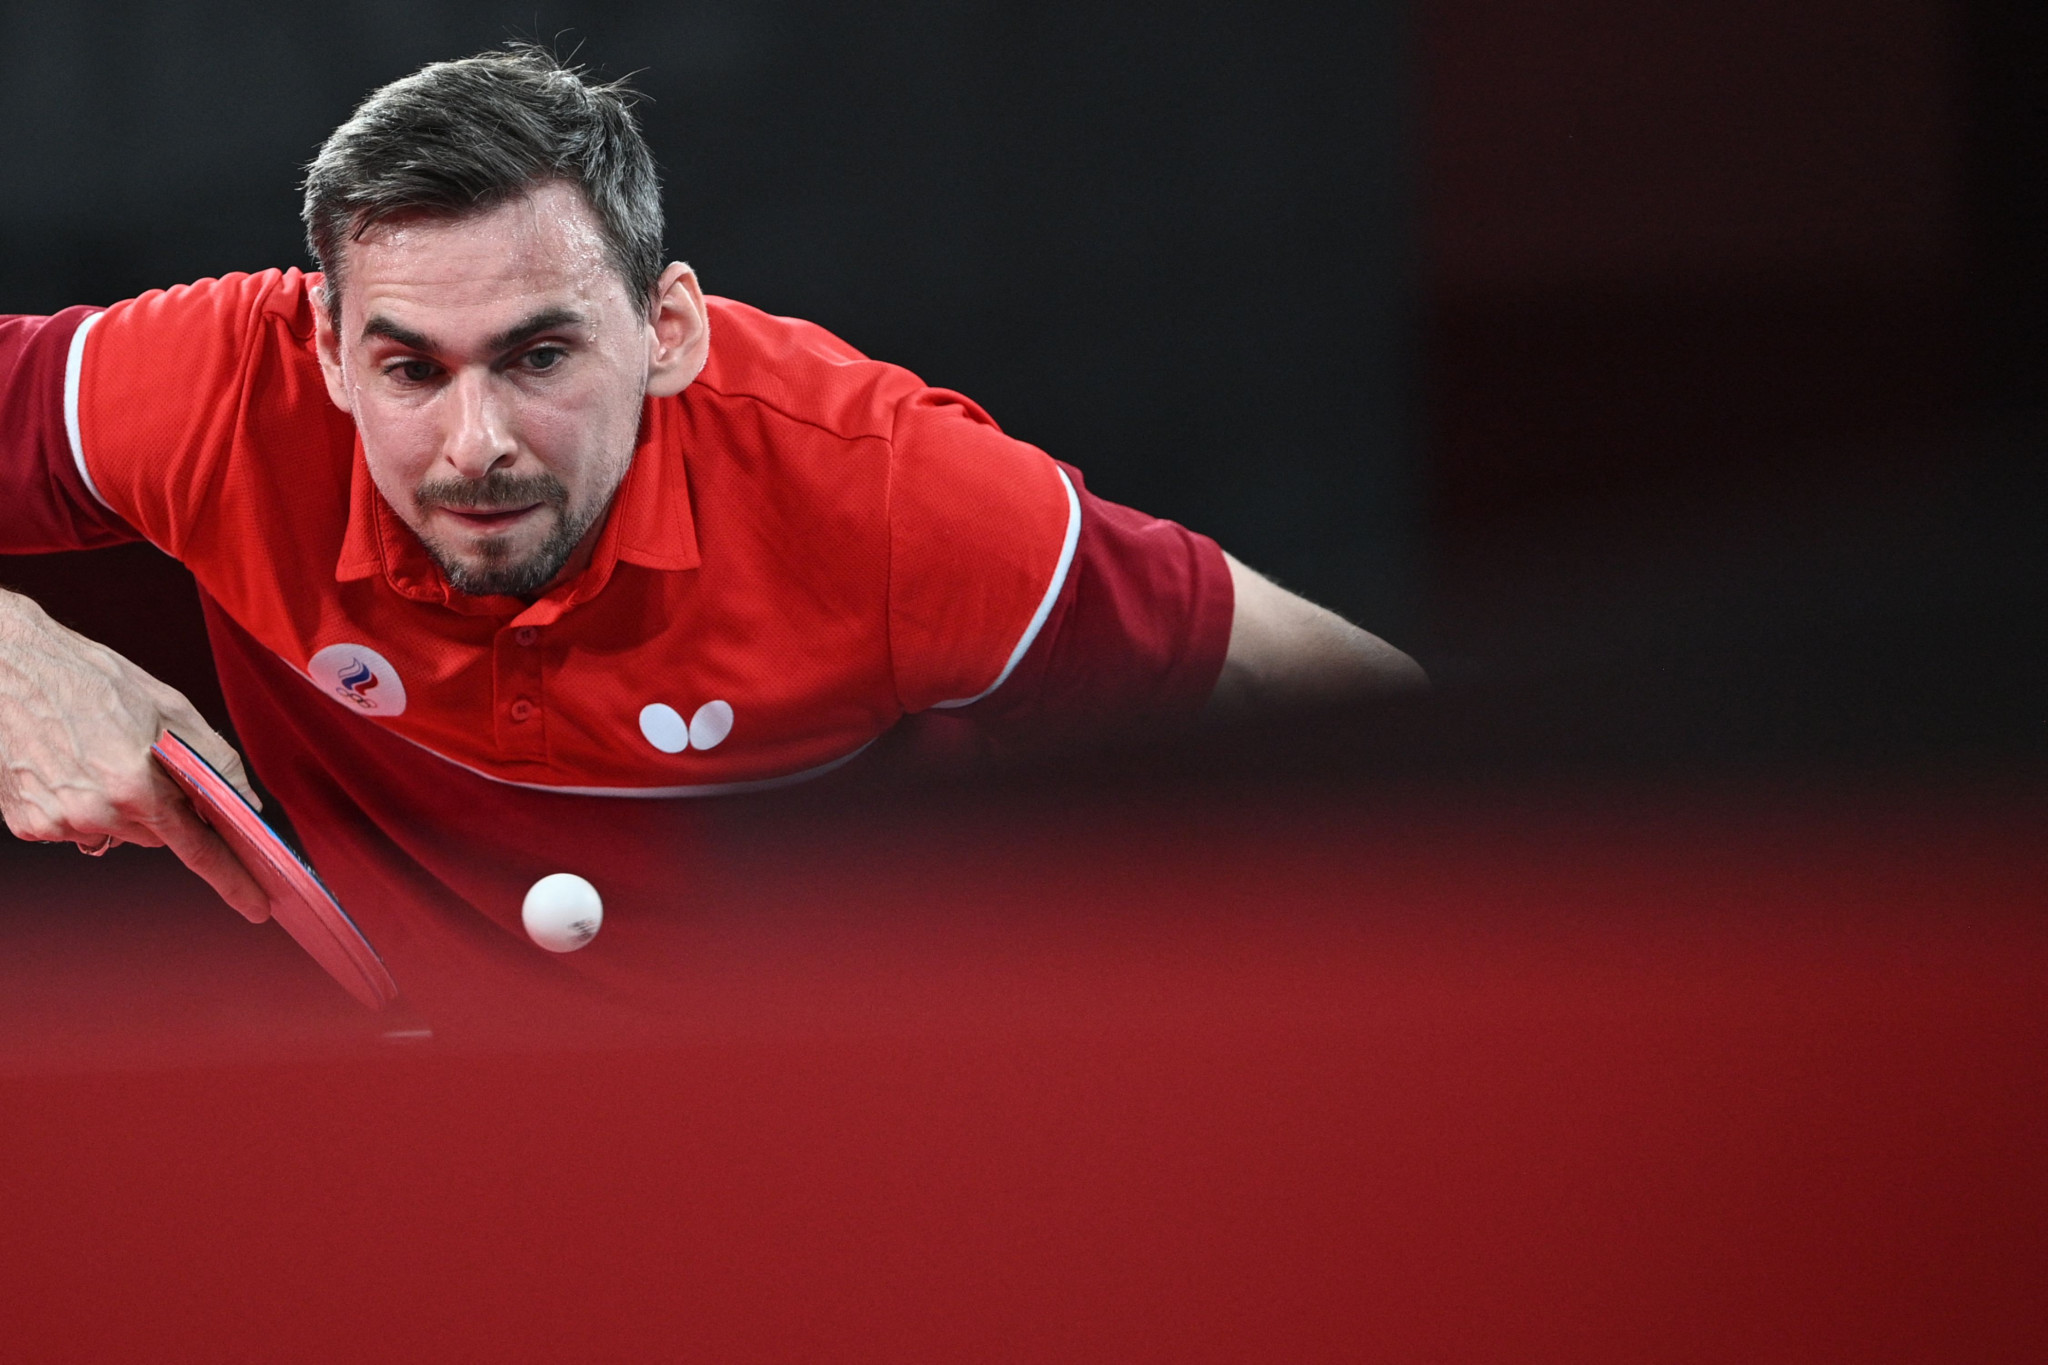 ITTF bans Russians from World Team Table Tennis Championships in China